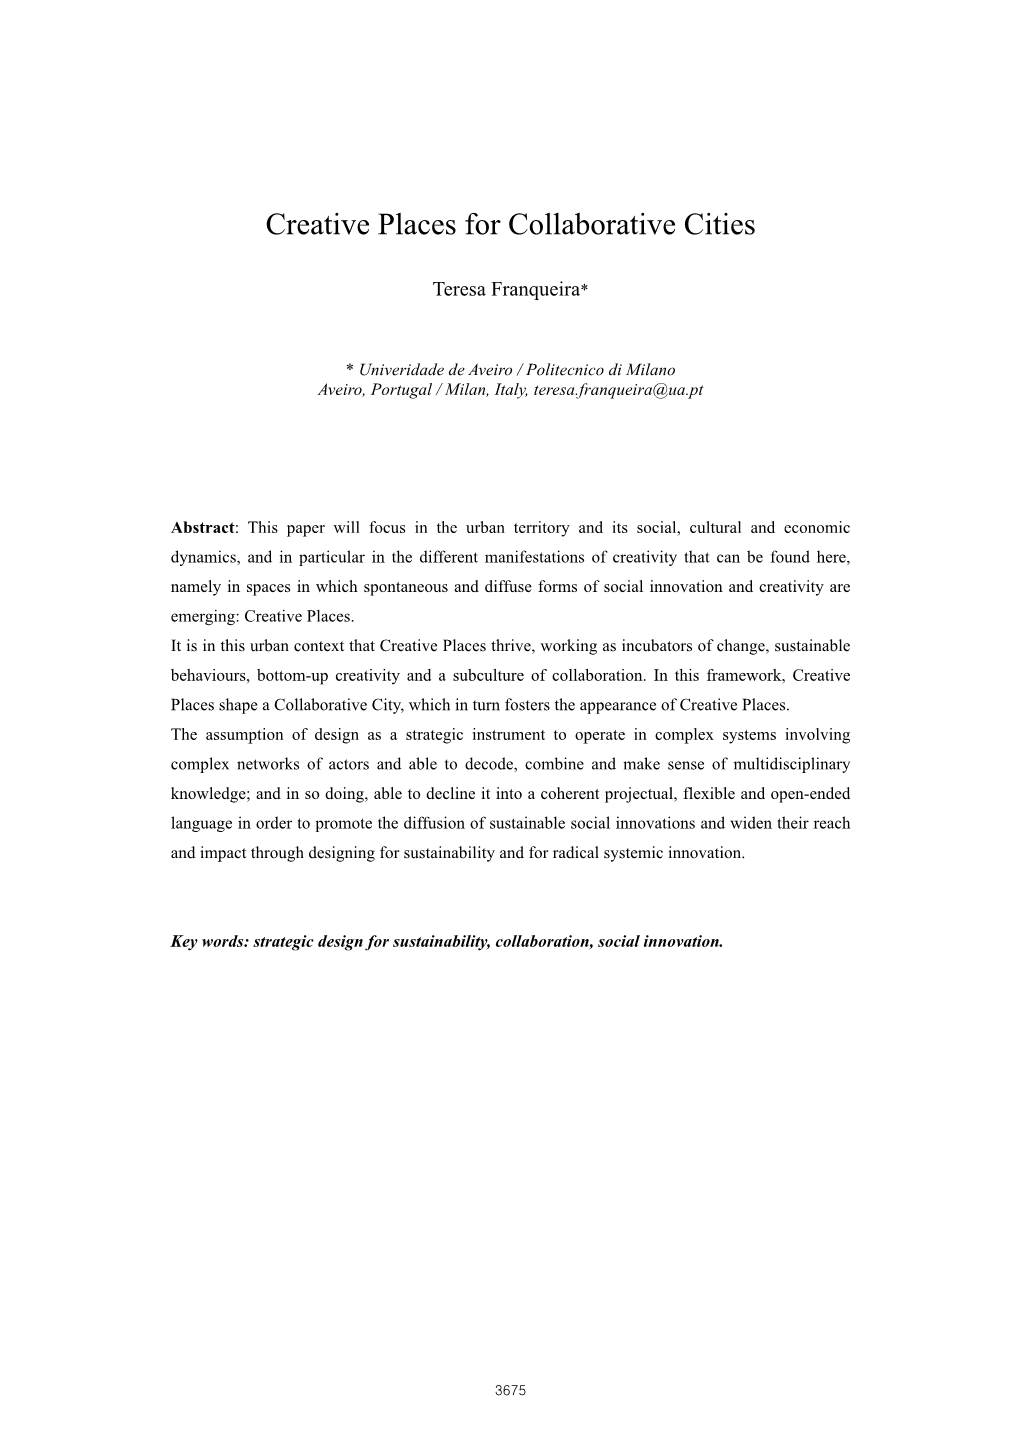 Creative Places for Collaborative Cities